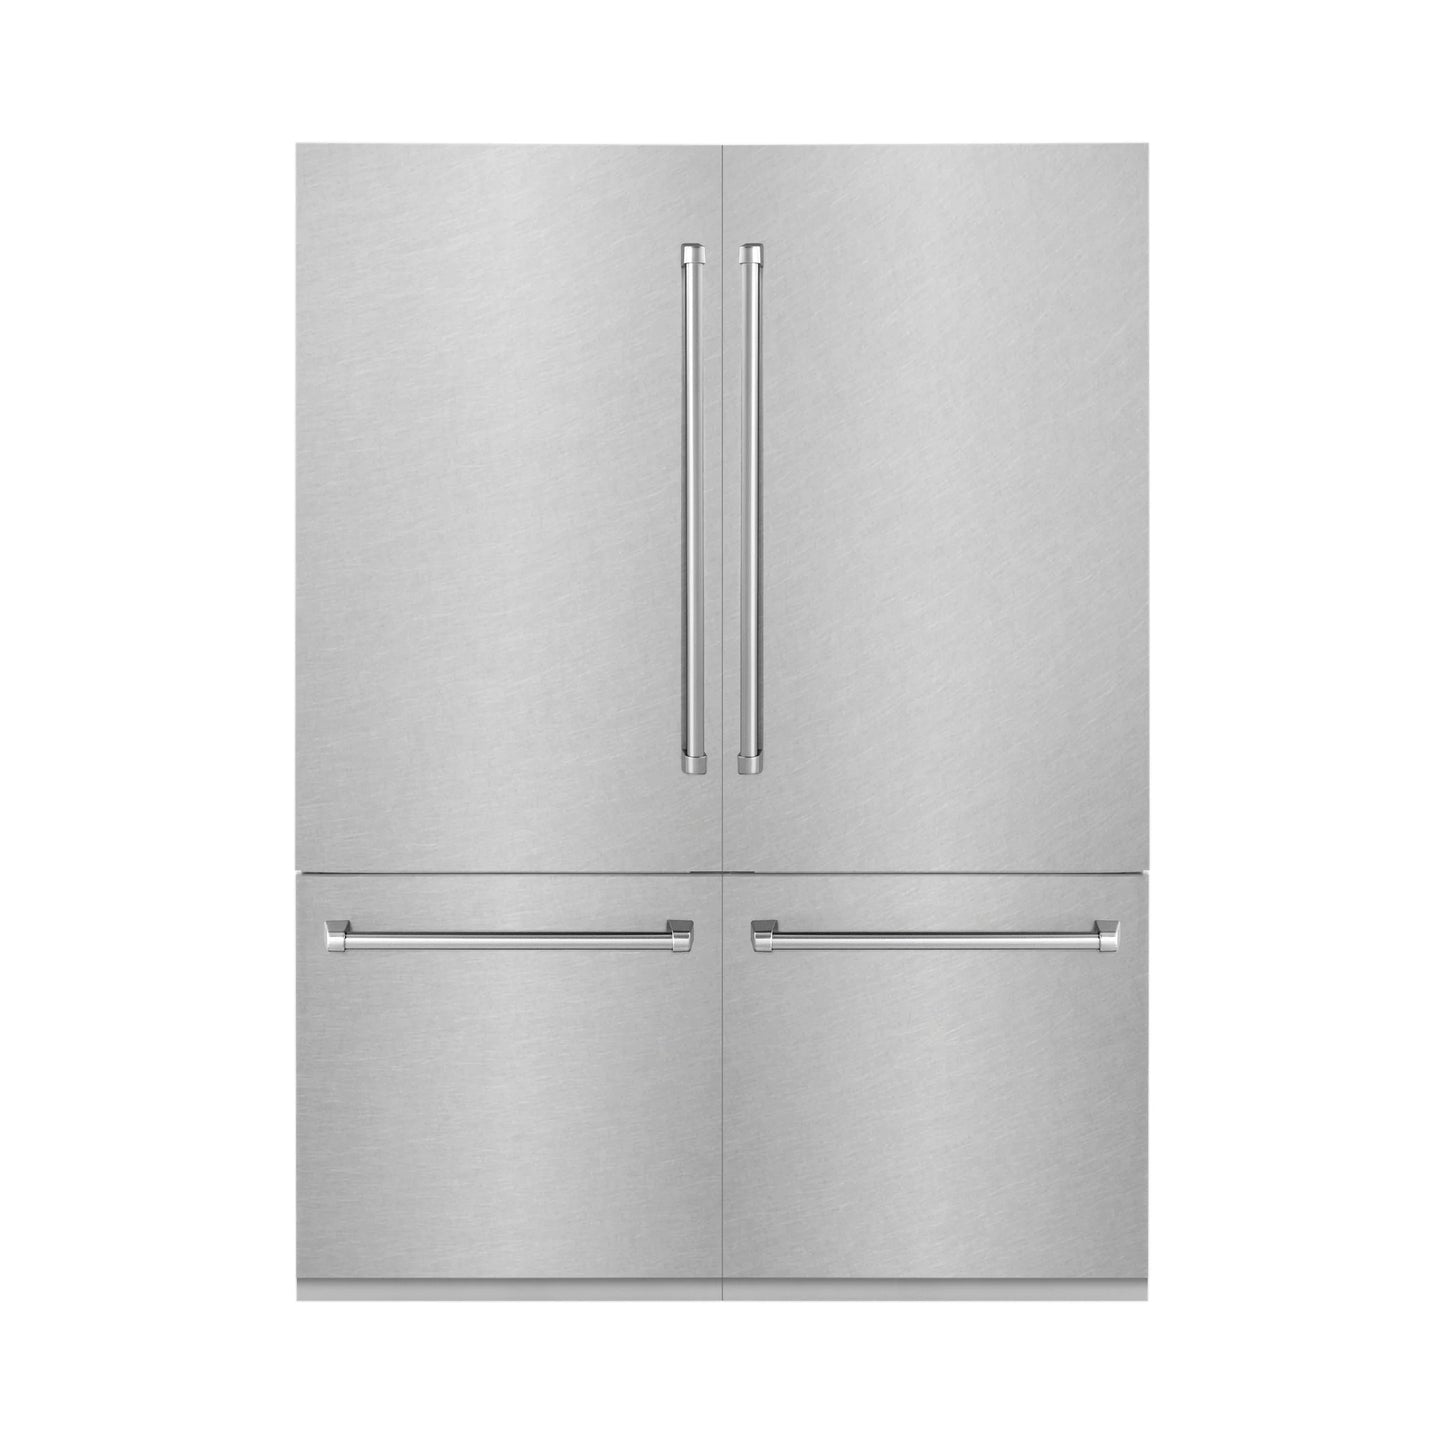 ZLINE 60" 32.2 cu. ft. Built-In Refrigerator with Internal Water and Ice Dispenser in Fingerprint Resistant Stainless Steel, RBIV-SN-60